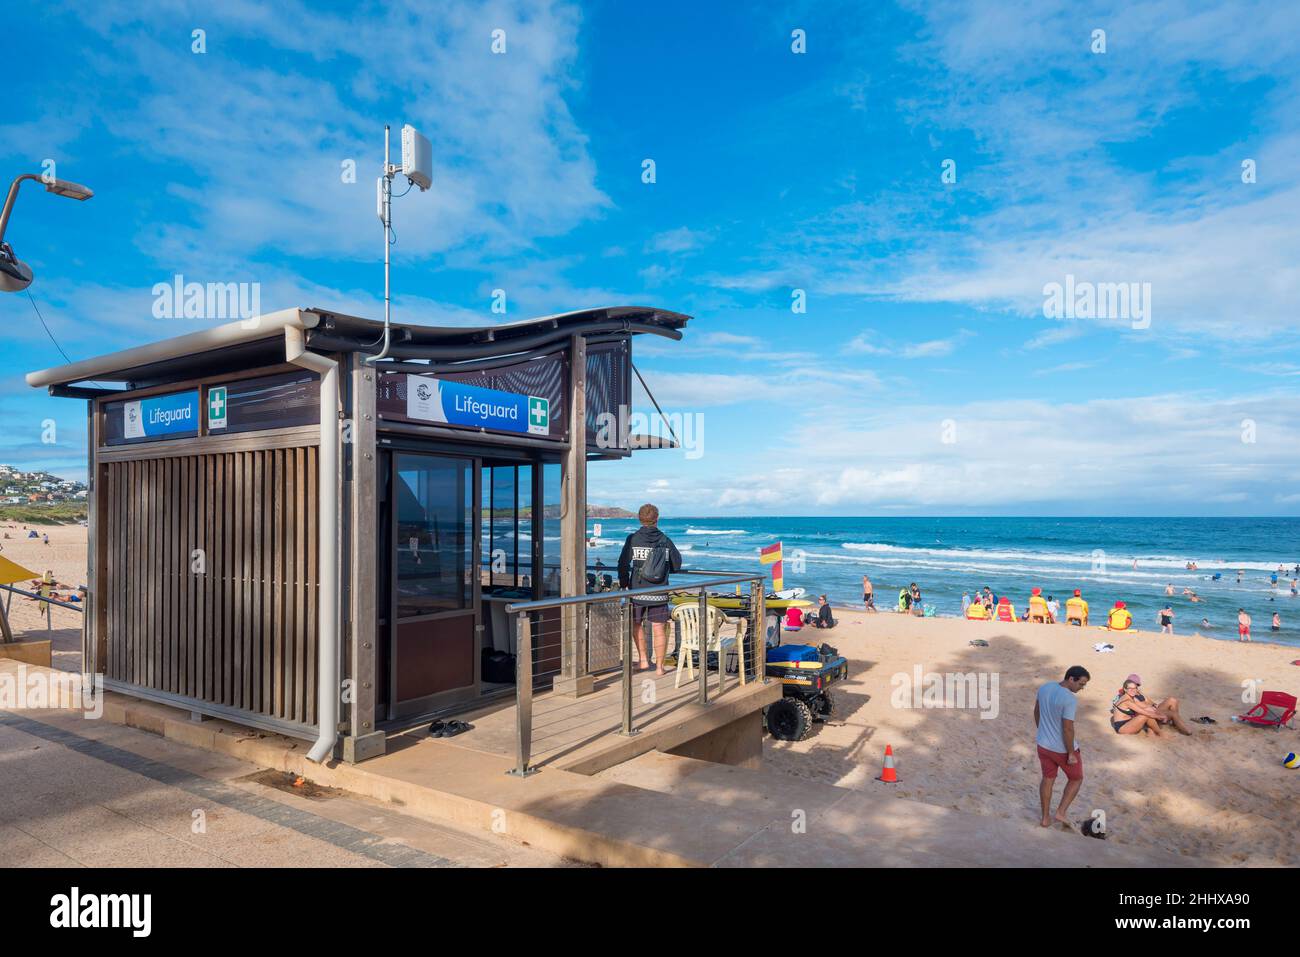 The Lifeguard station and on the beach in yellow, volunteer Lifesavers, at Dee Why Beach in Sydney, New South Wales, Australia Stock Photo